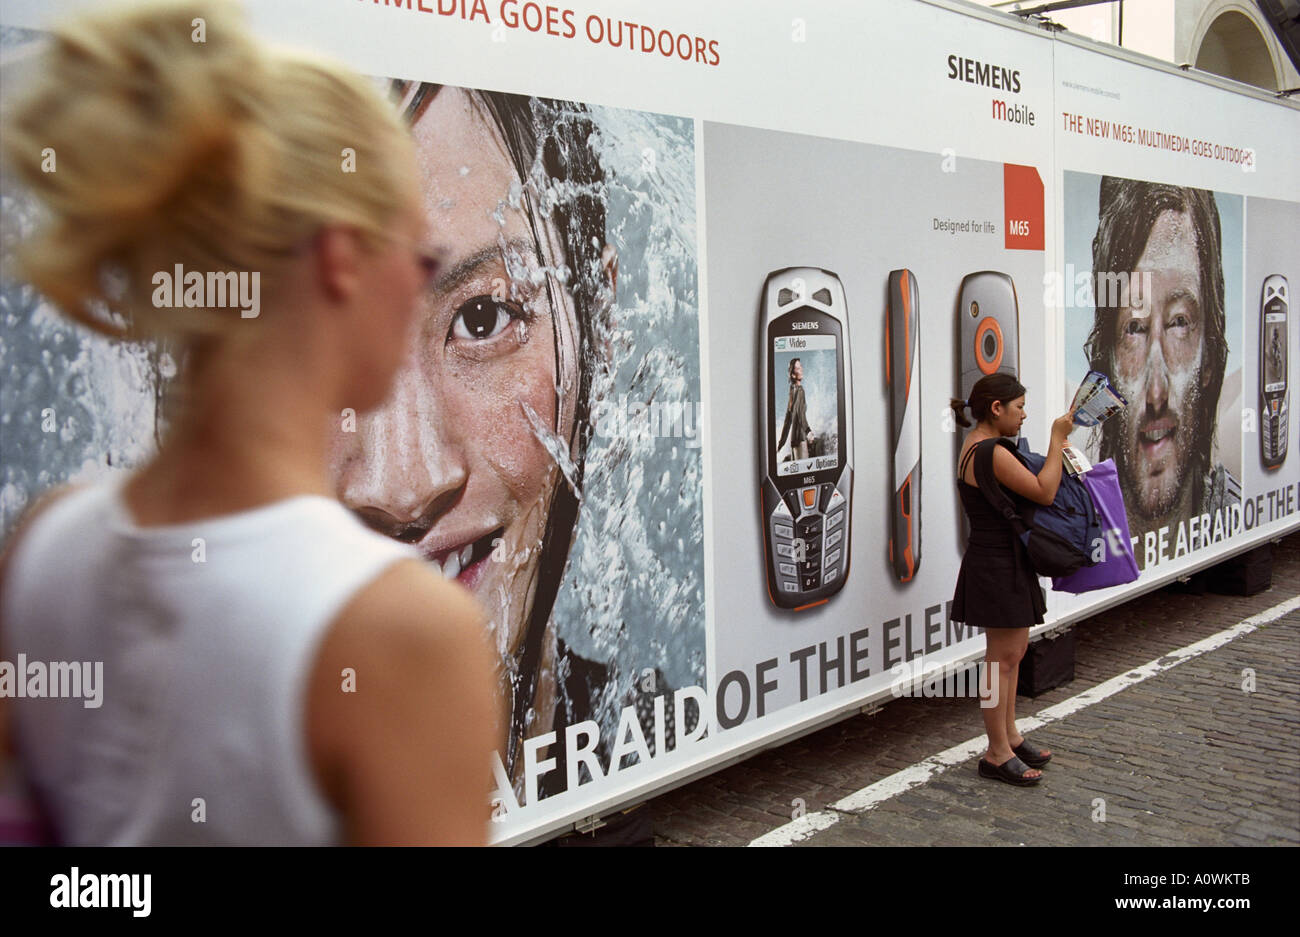 Siemens mobile phone advertisements at Covent Garden. photographed 2004. London, UK Stock Photo